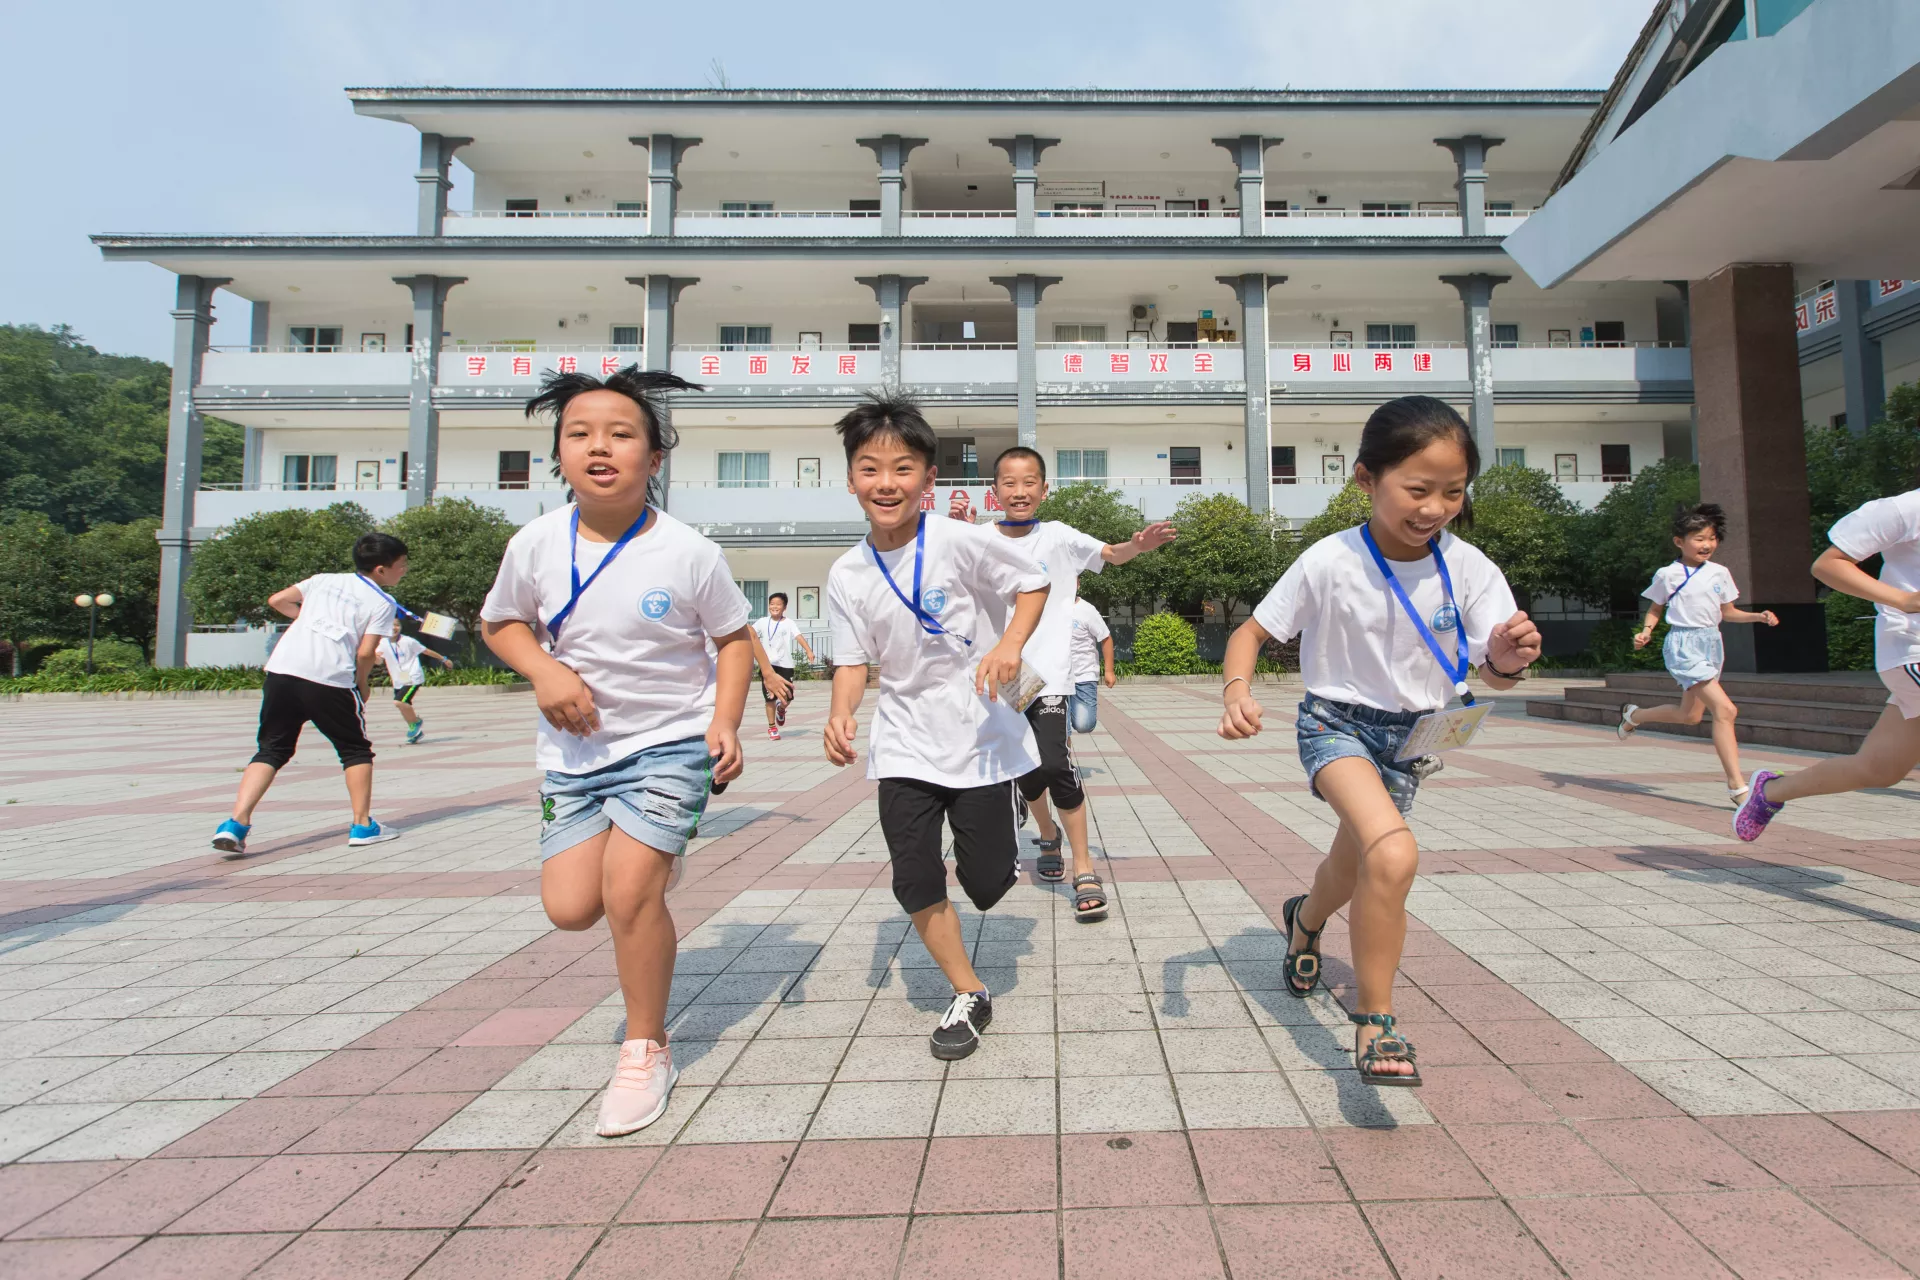 Children participate in a DRR summer camp in Shifang, Sichuan Province in July, 2017.